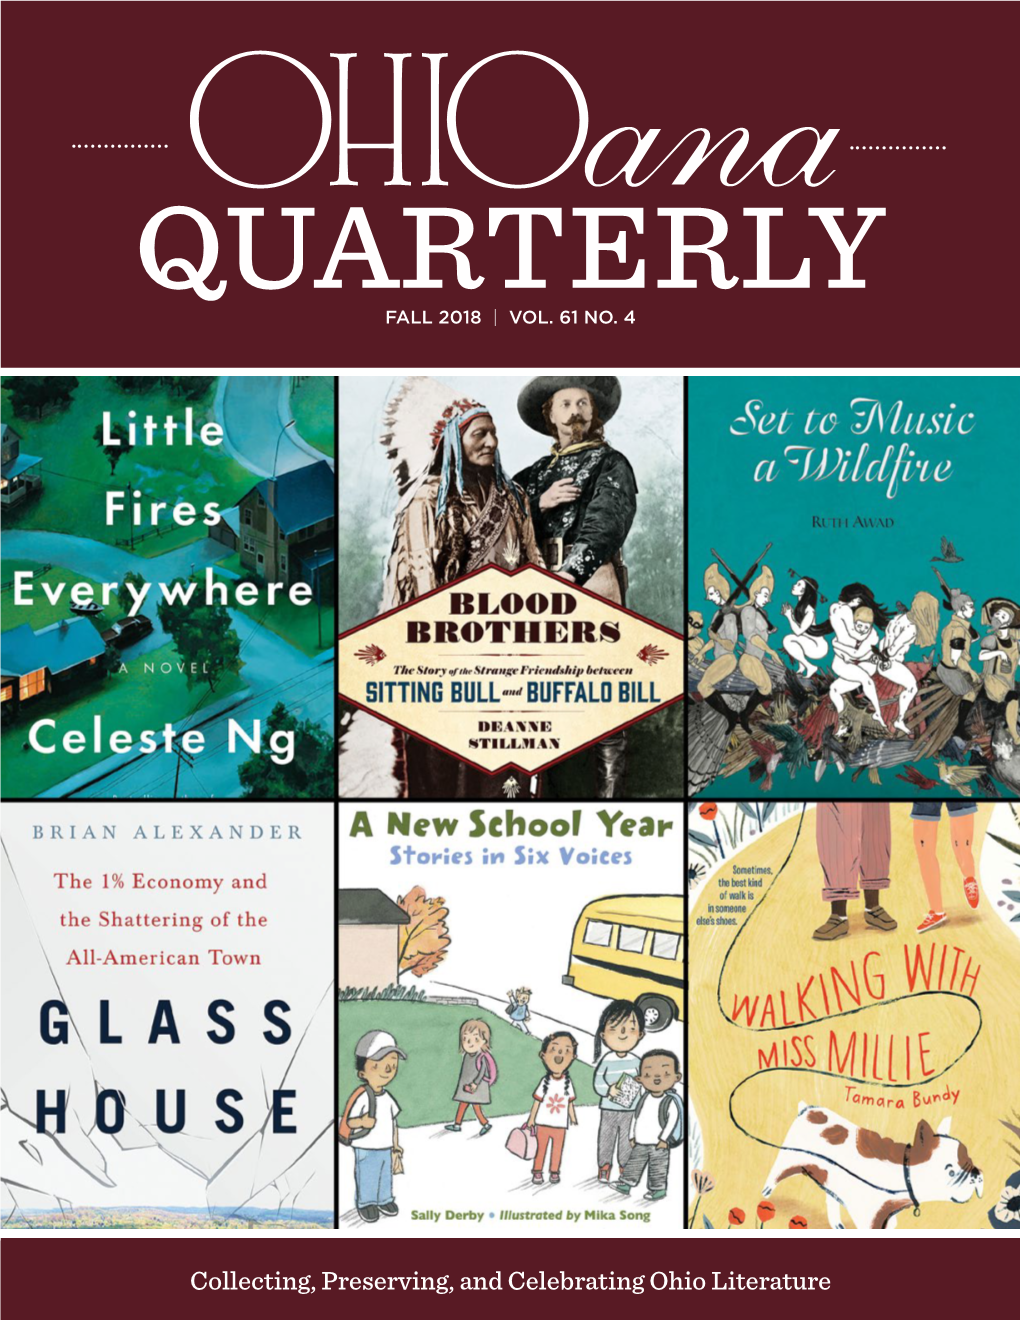 Collecting, Preserving, and Celebrating Ohio Literature Fall 2018 | 1 Contents QUARTERLY FALL 2018